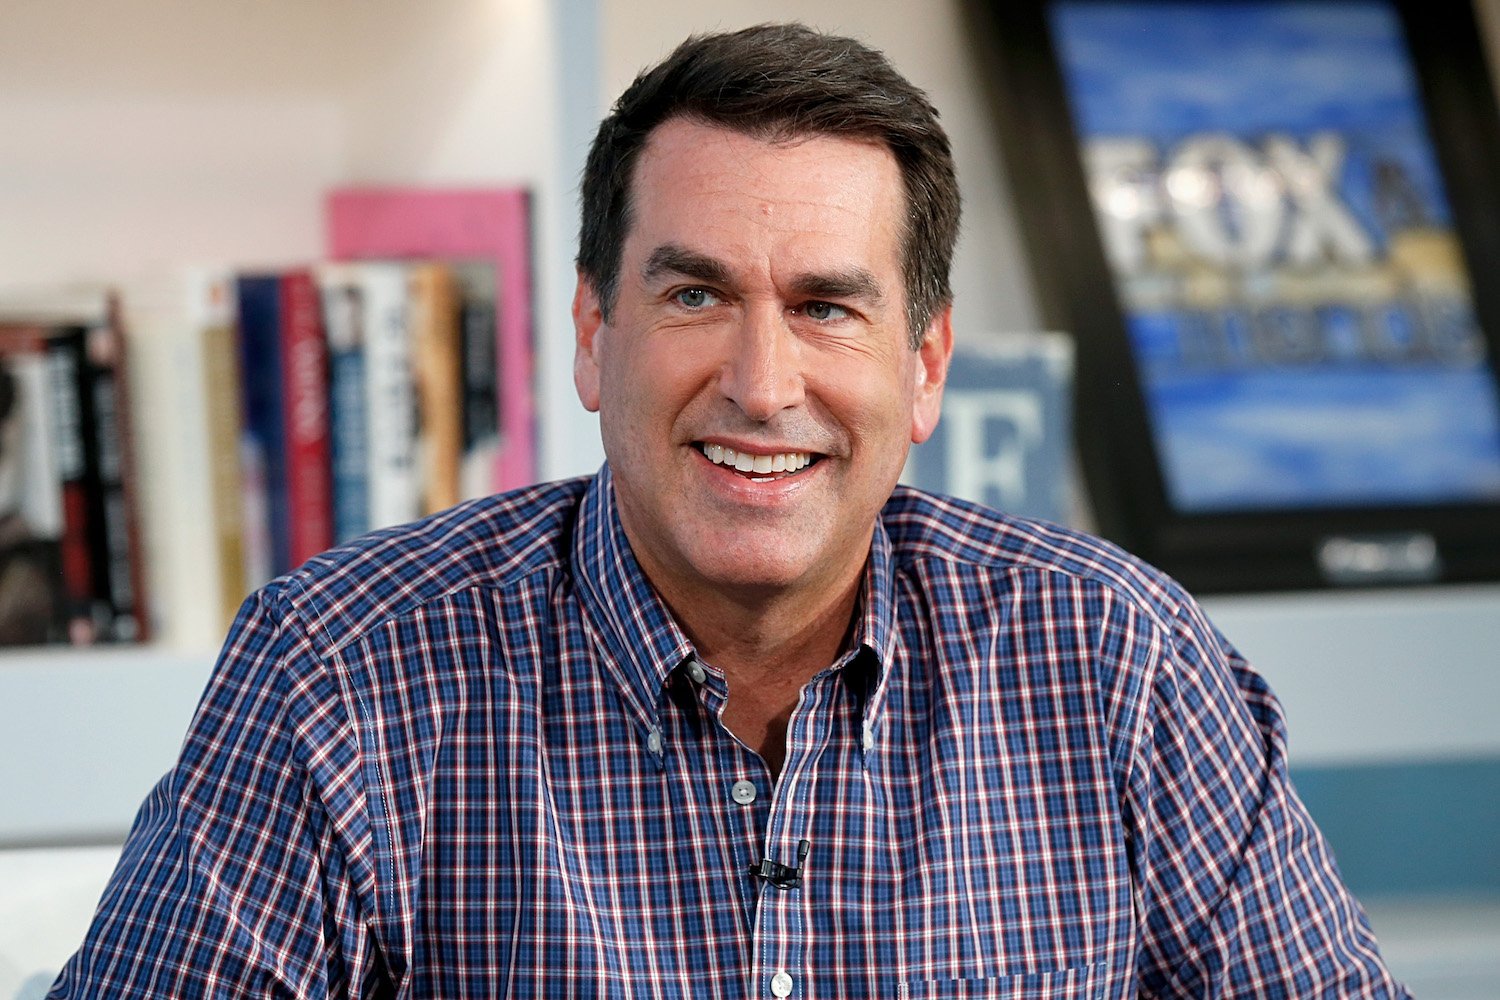 Rob Riggle’s 1 Season ‘SNL’ Tenure Left Him Not Knowing ‘What Was Funny Anymore’